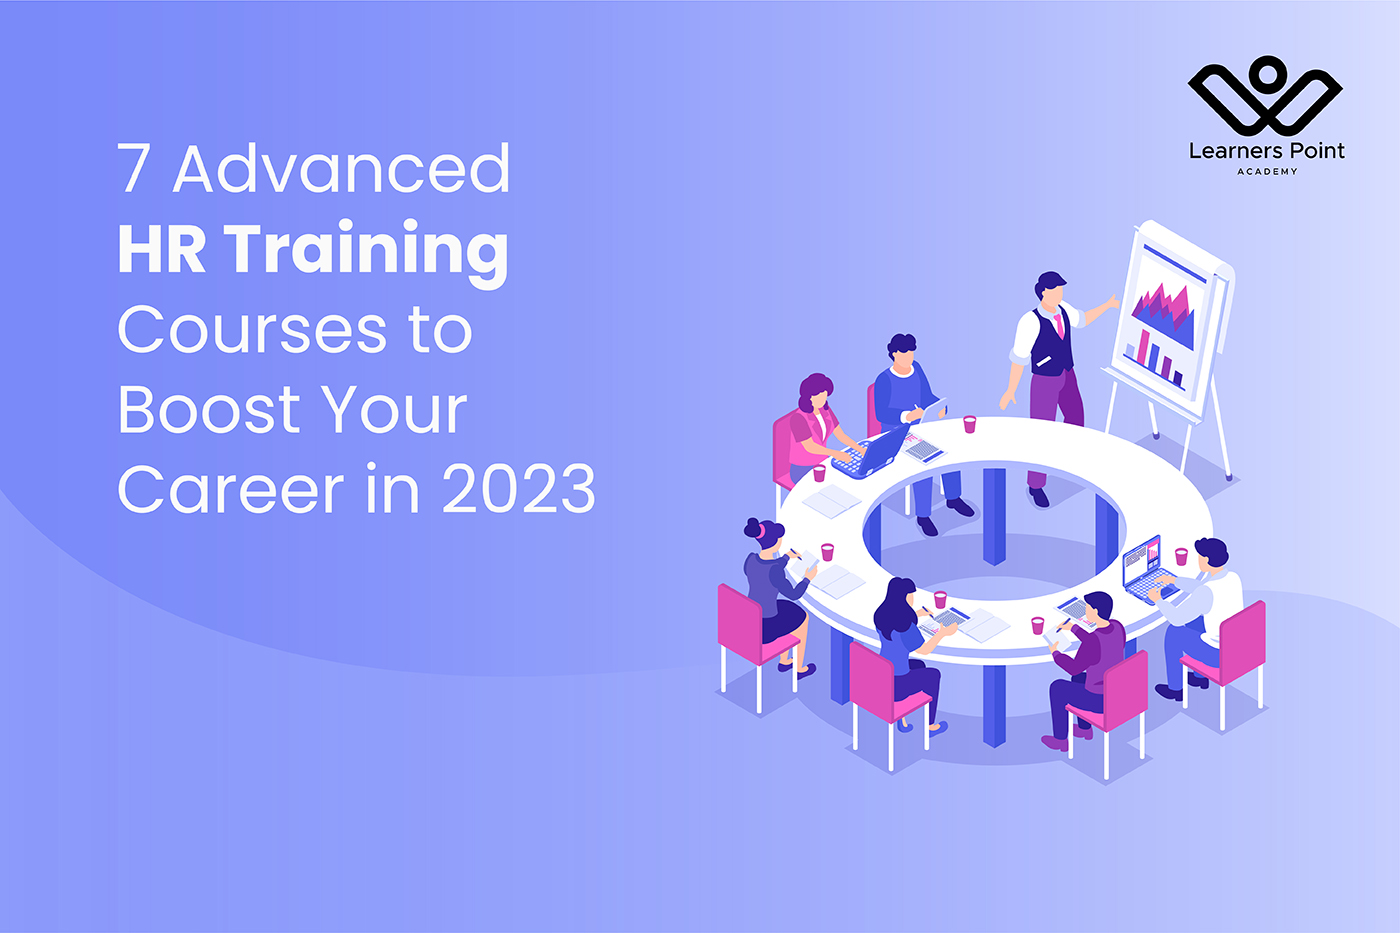 7 Advanced HR Training Courses to Boost Your Career in 2023